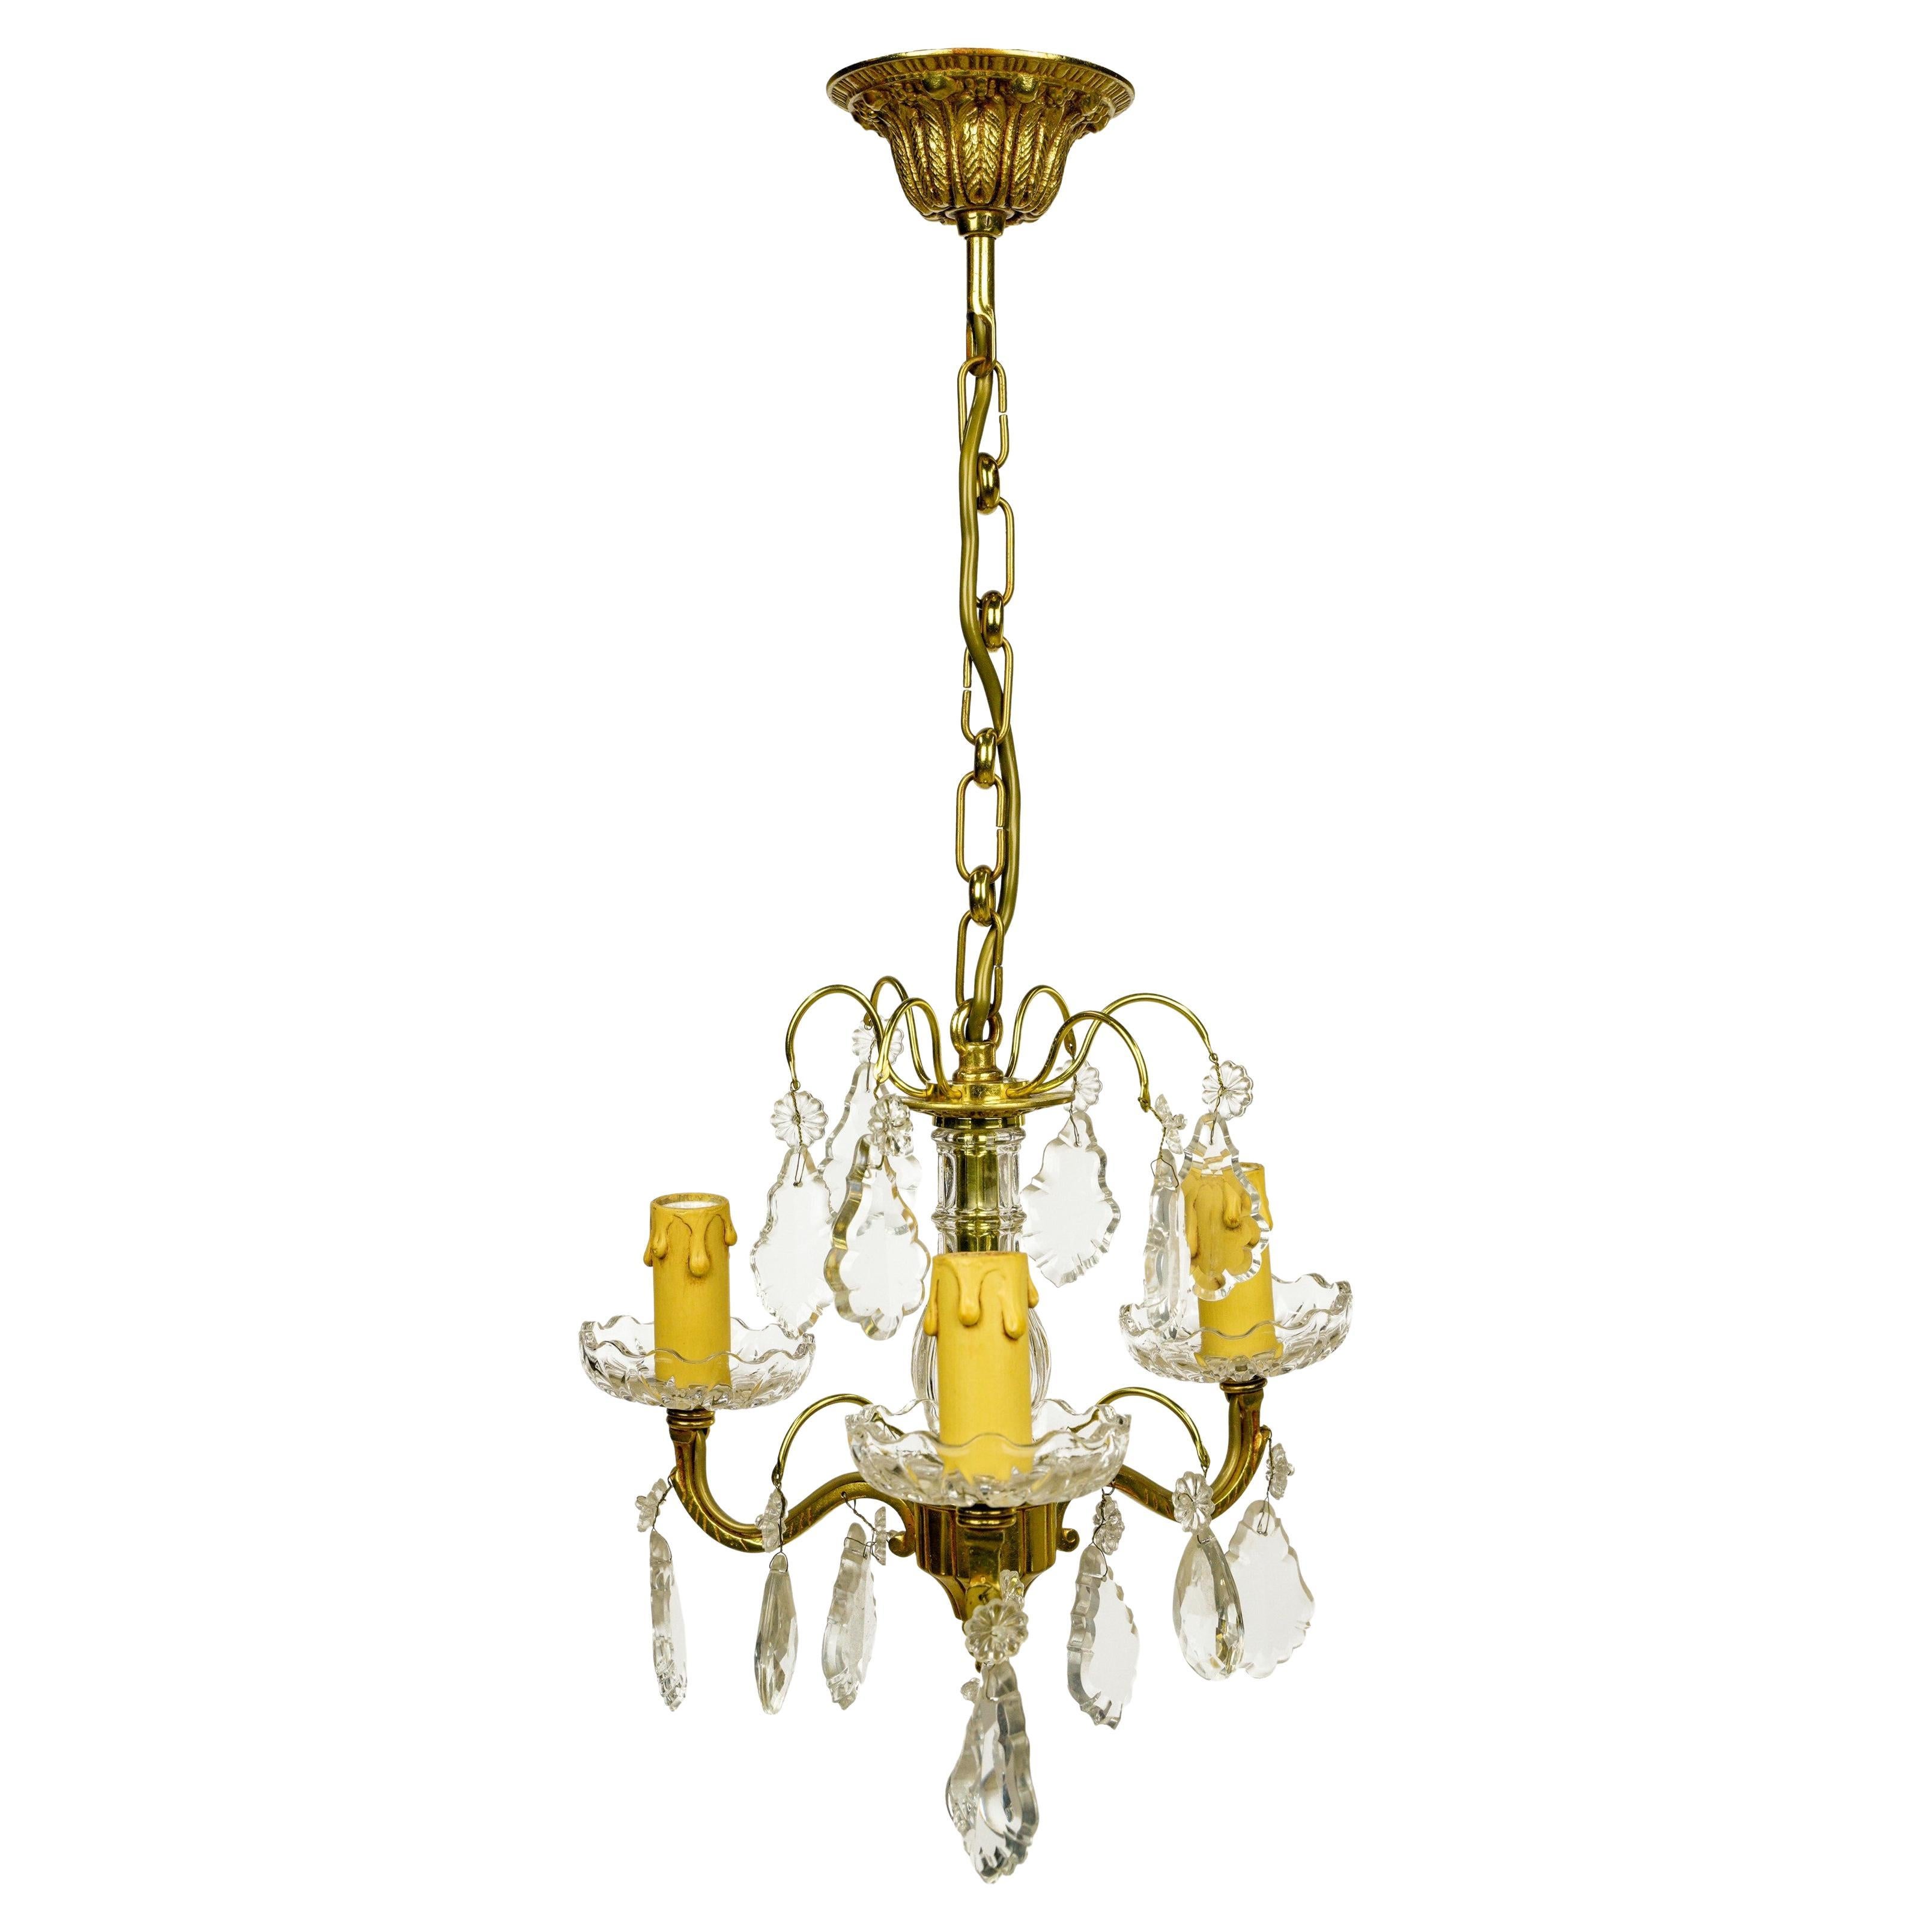 Antique French Petite 3 Arm Bronze & Crystal Chandelier